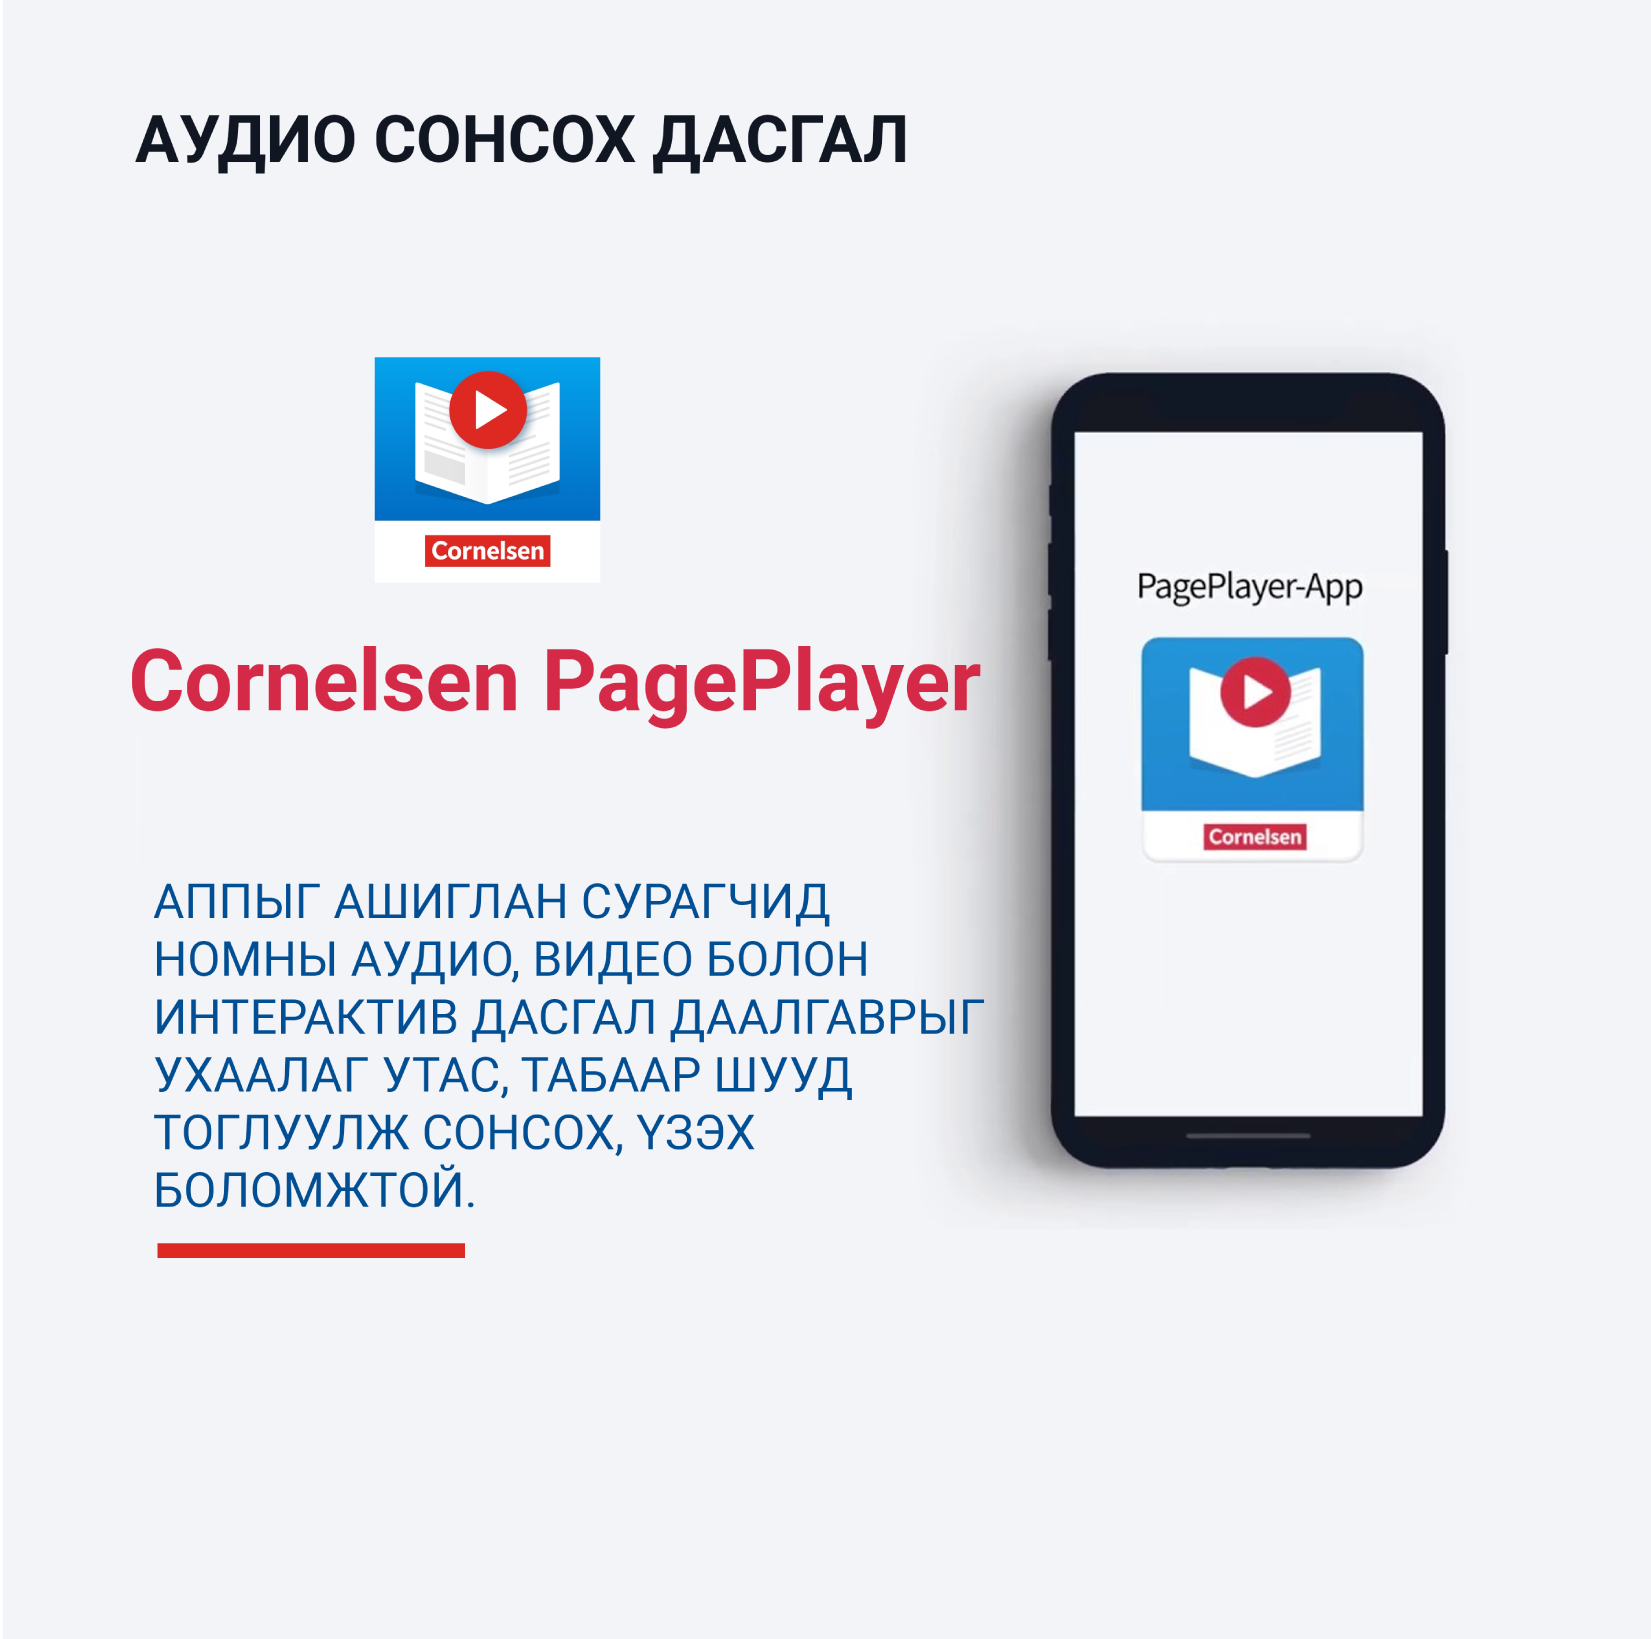 PagePlayer-App